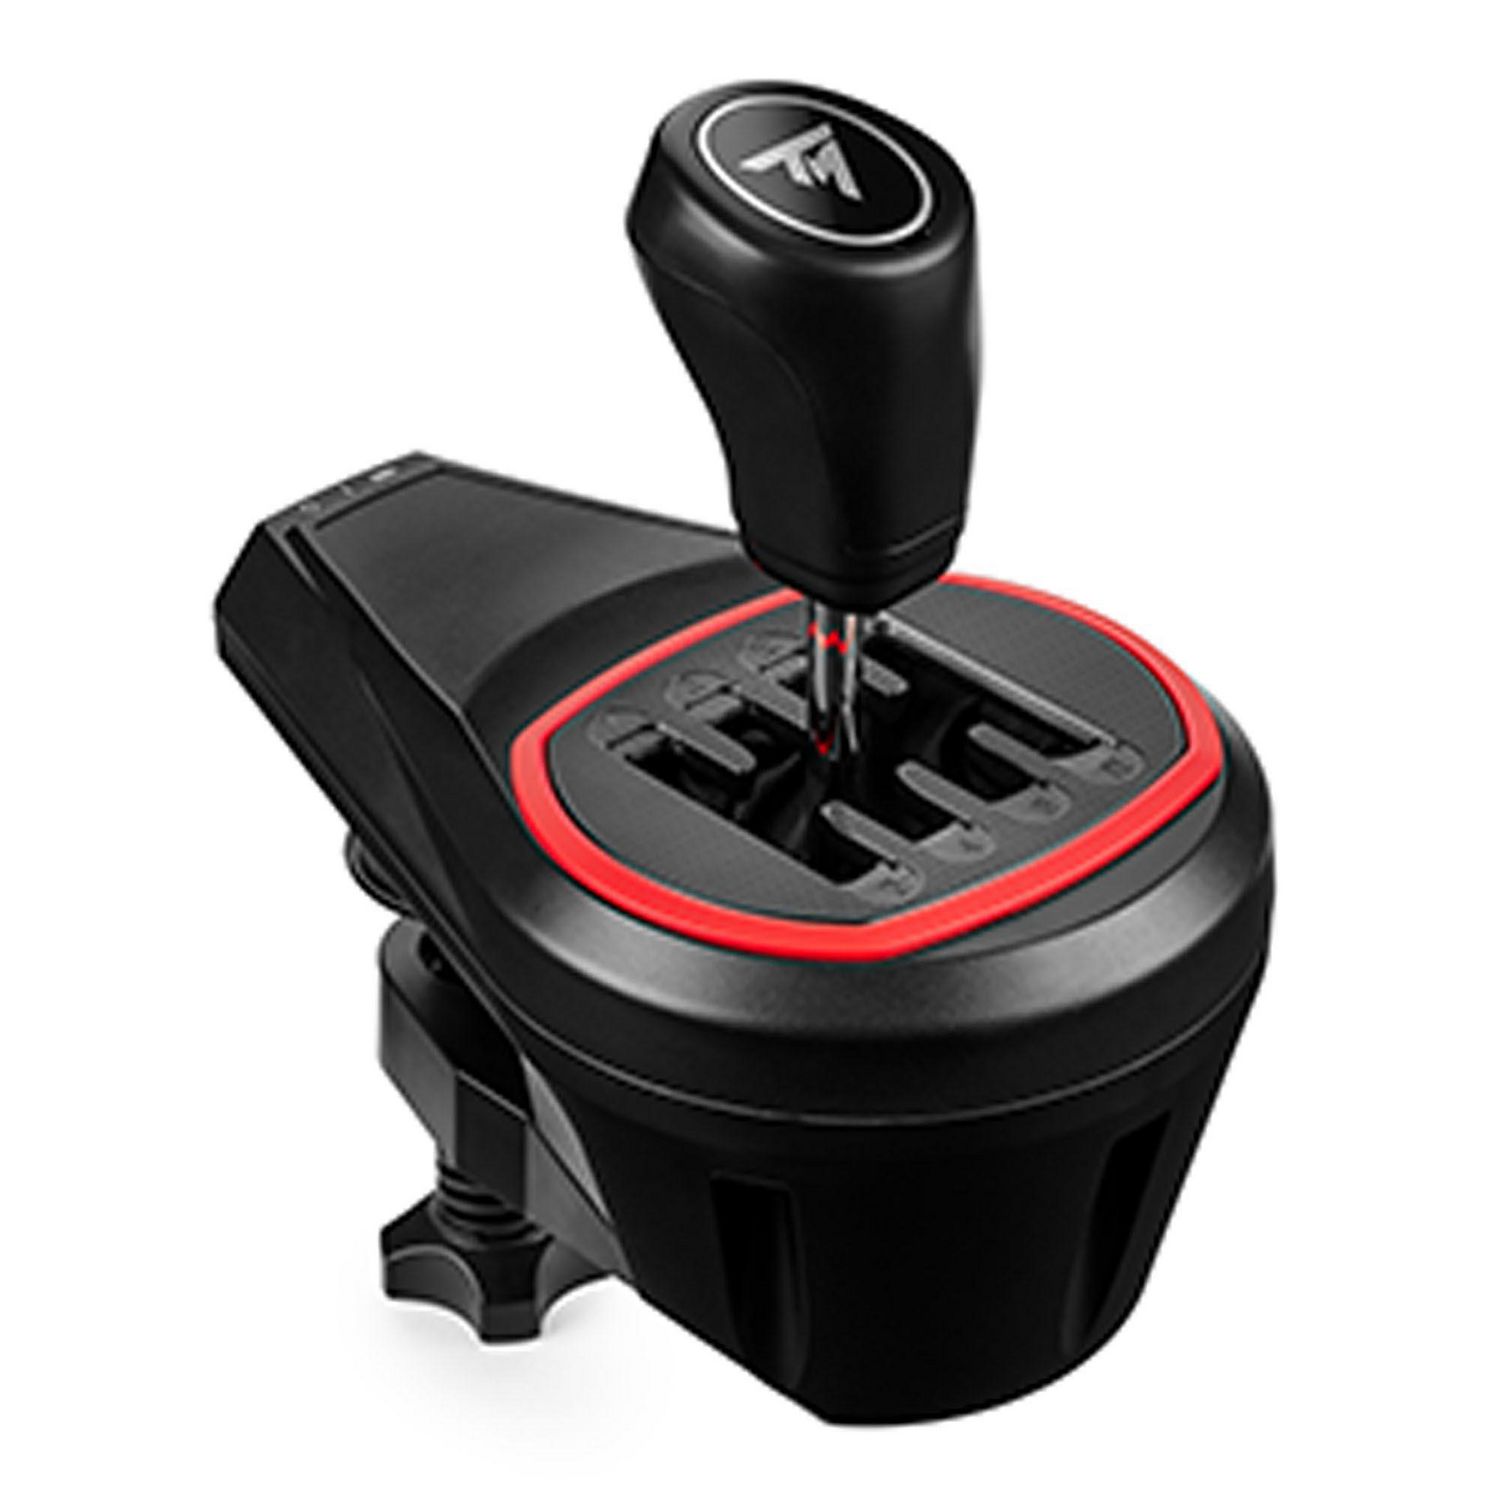 The New Thrustmaster SimTask Range For Driving Sims - ORD